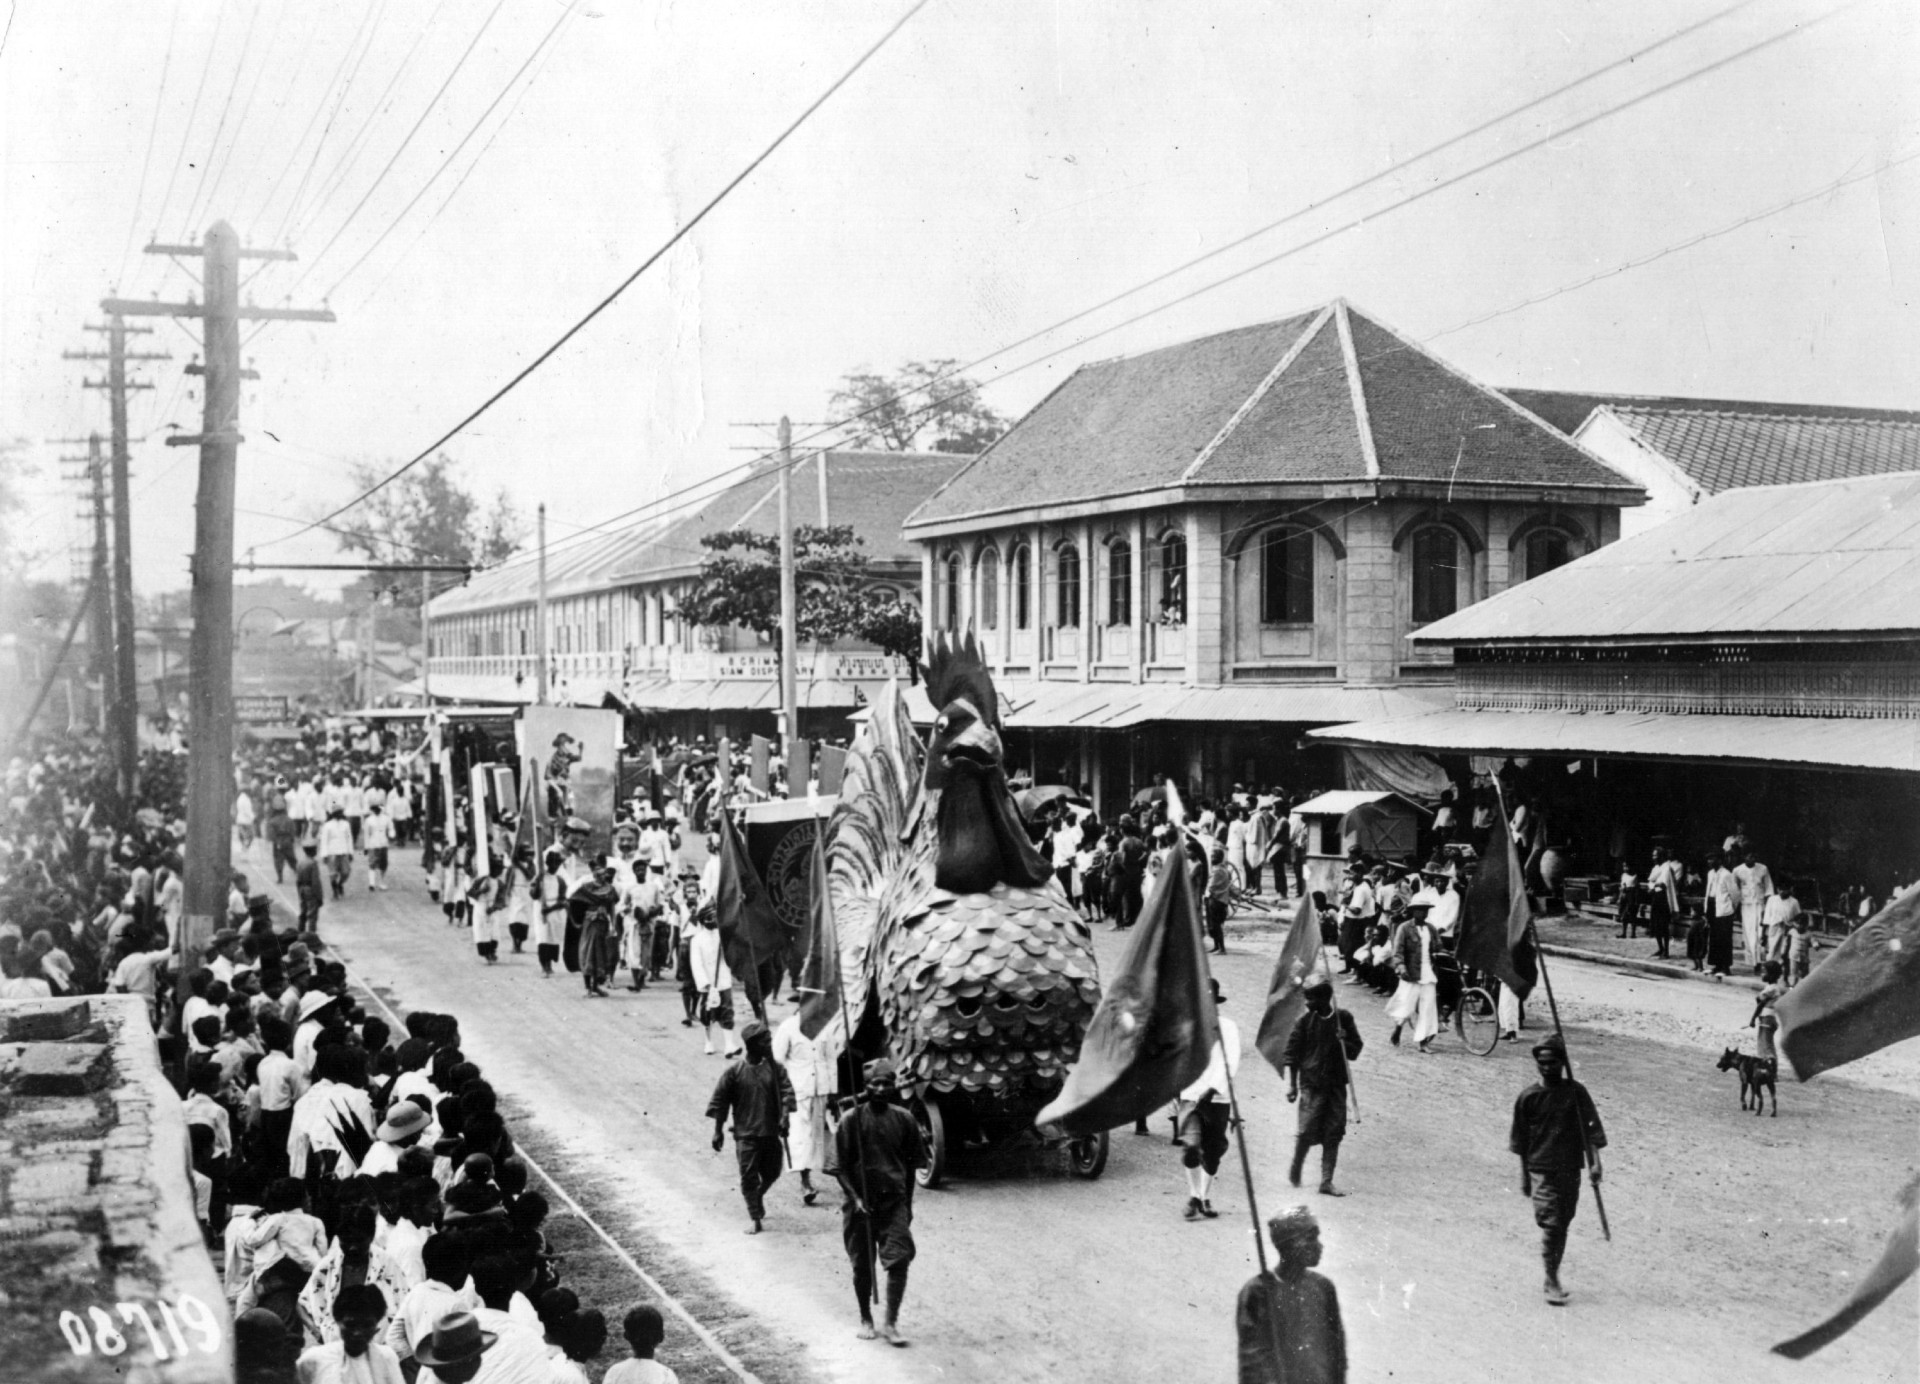 The capital of Thailand in 1945.<p><a href="https://www.msn.com/en-us/community/channel/vid-7xx8mnucu55yw63we9va2gwr7uihbxwc68fxqp25x6tg4ftibpra?cvid=94631541bc0f4f89bfd59158d696ad7e">Follow us and access great exclusive content every day</a></p>